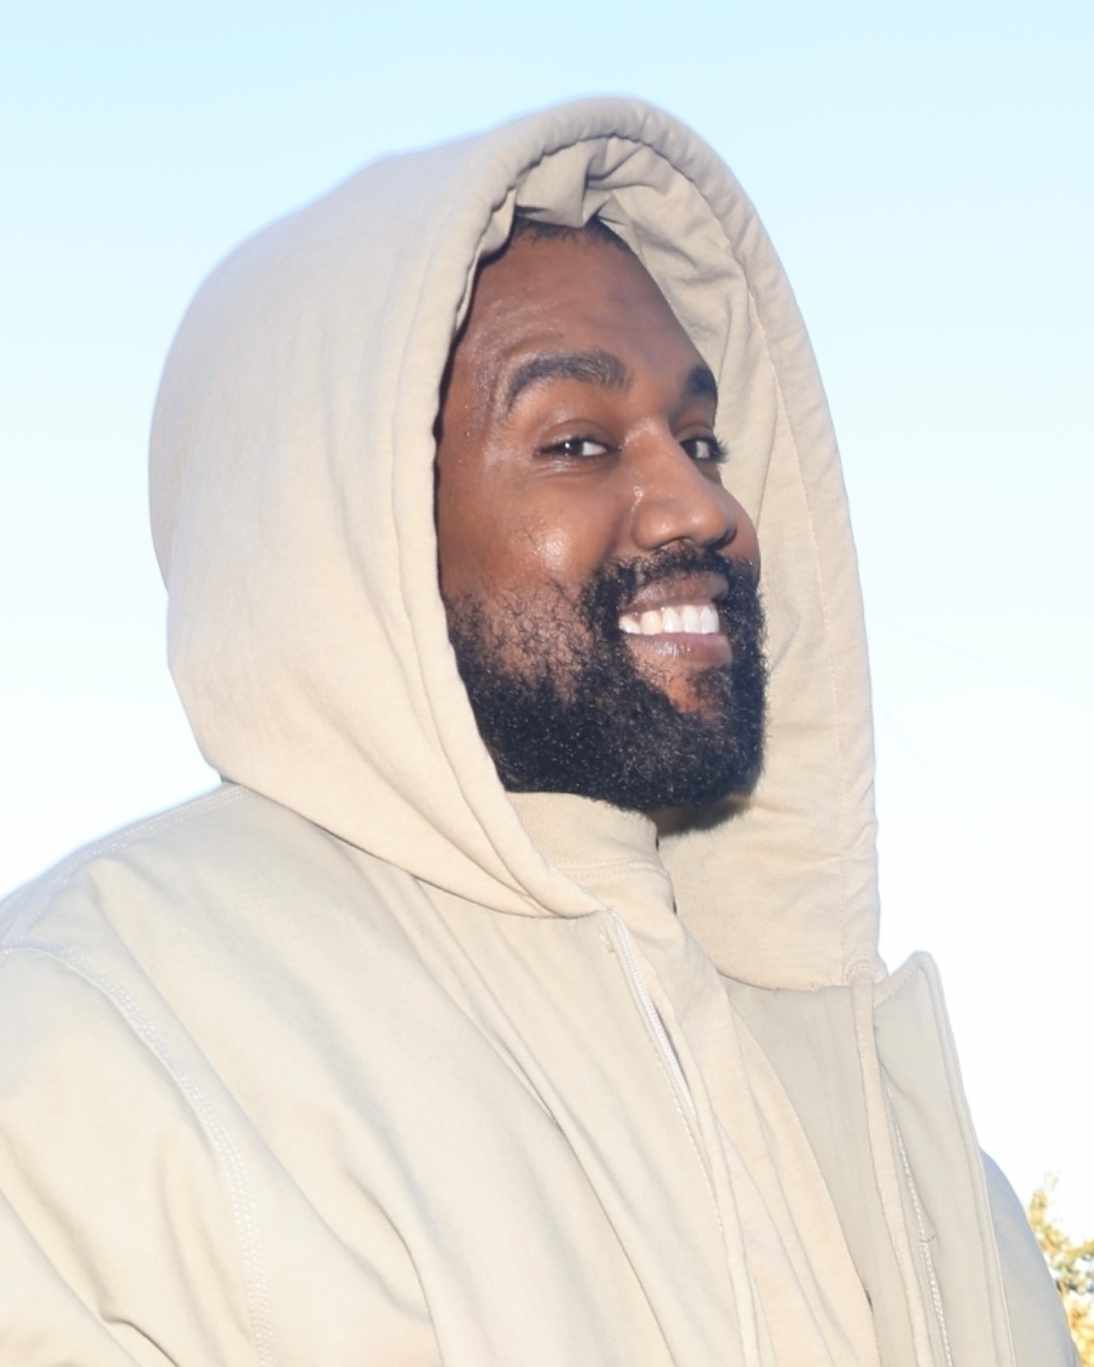 Is This Ye's New Uniform?